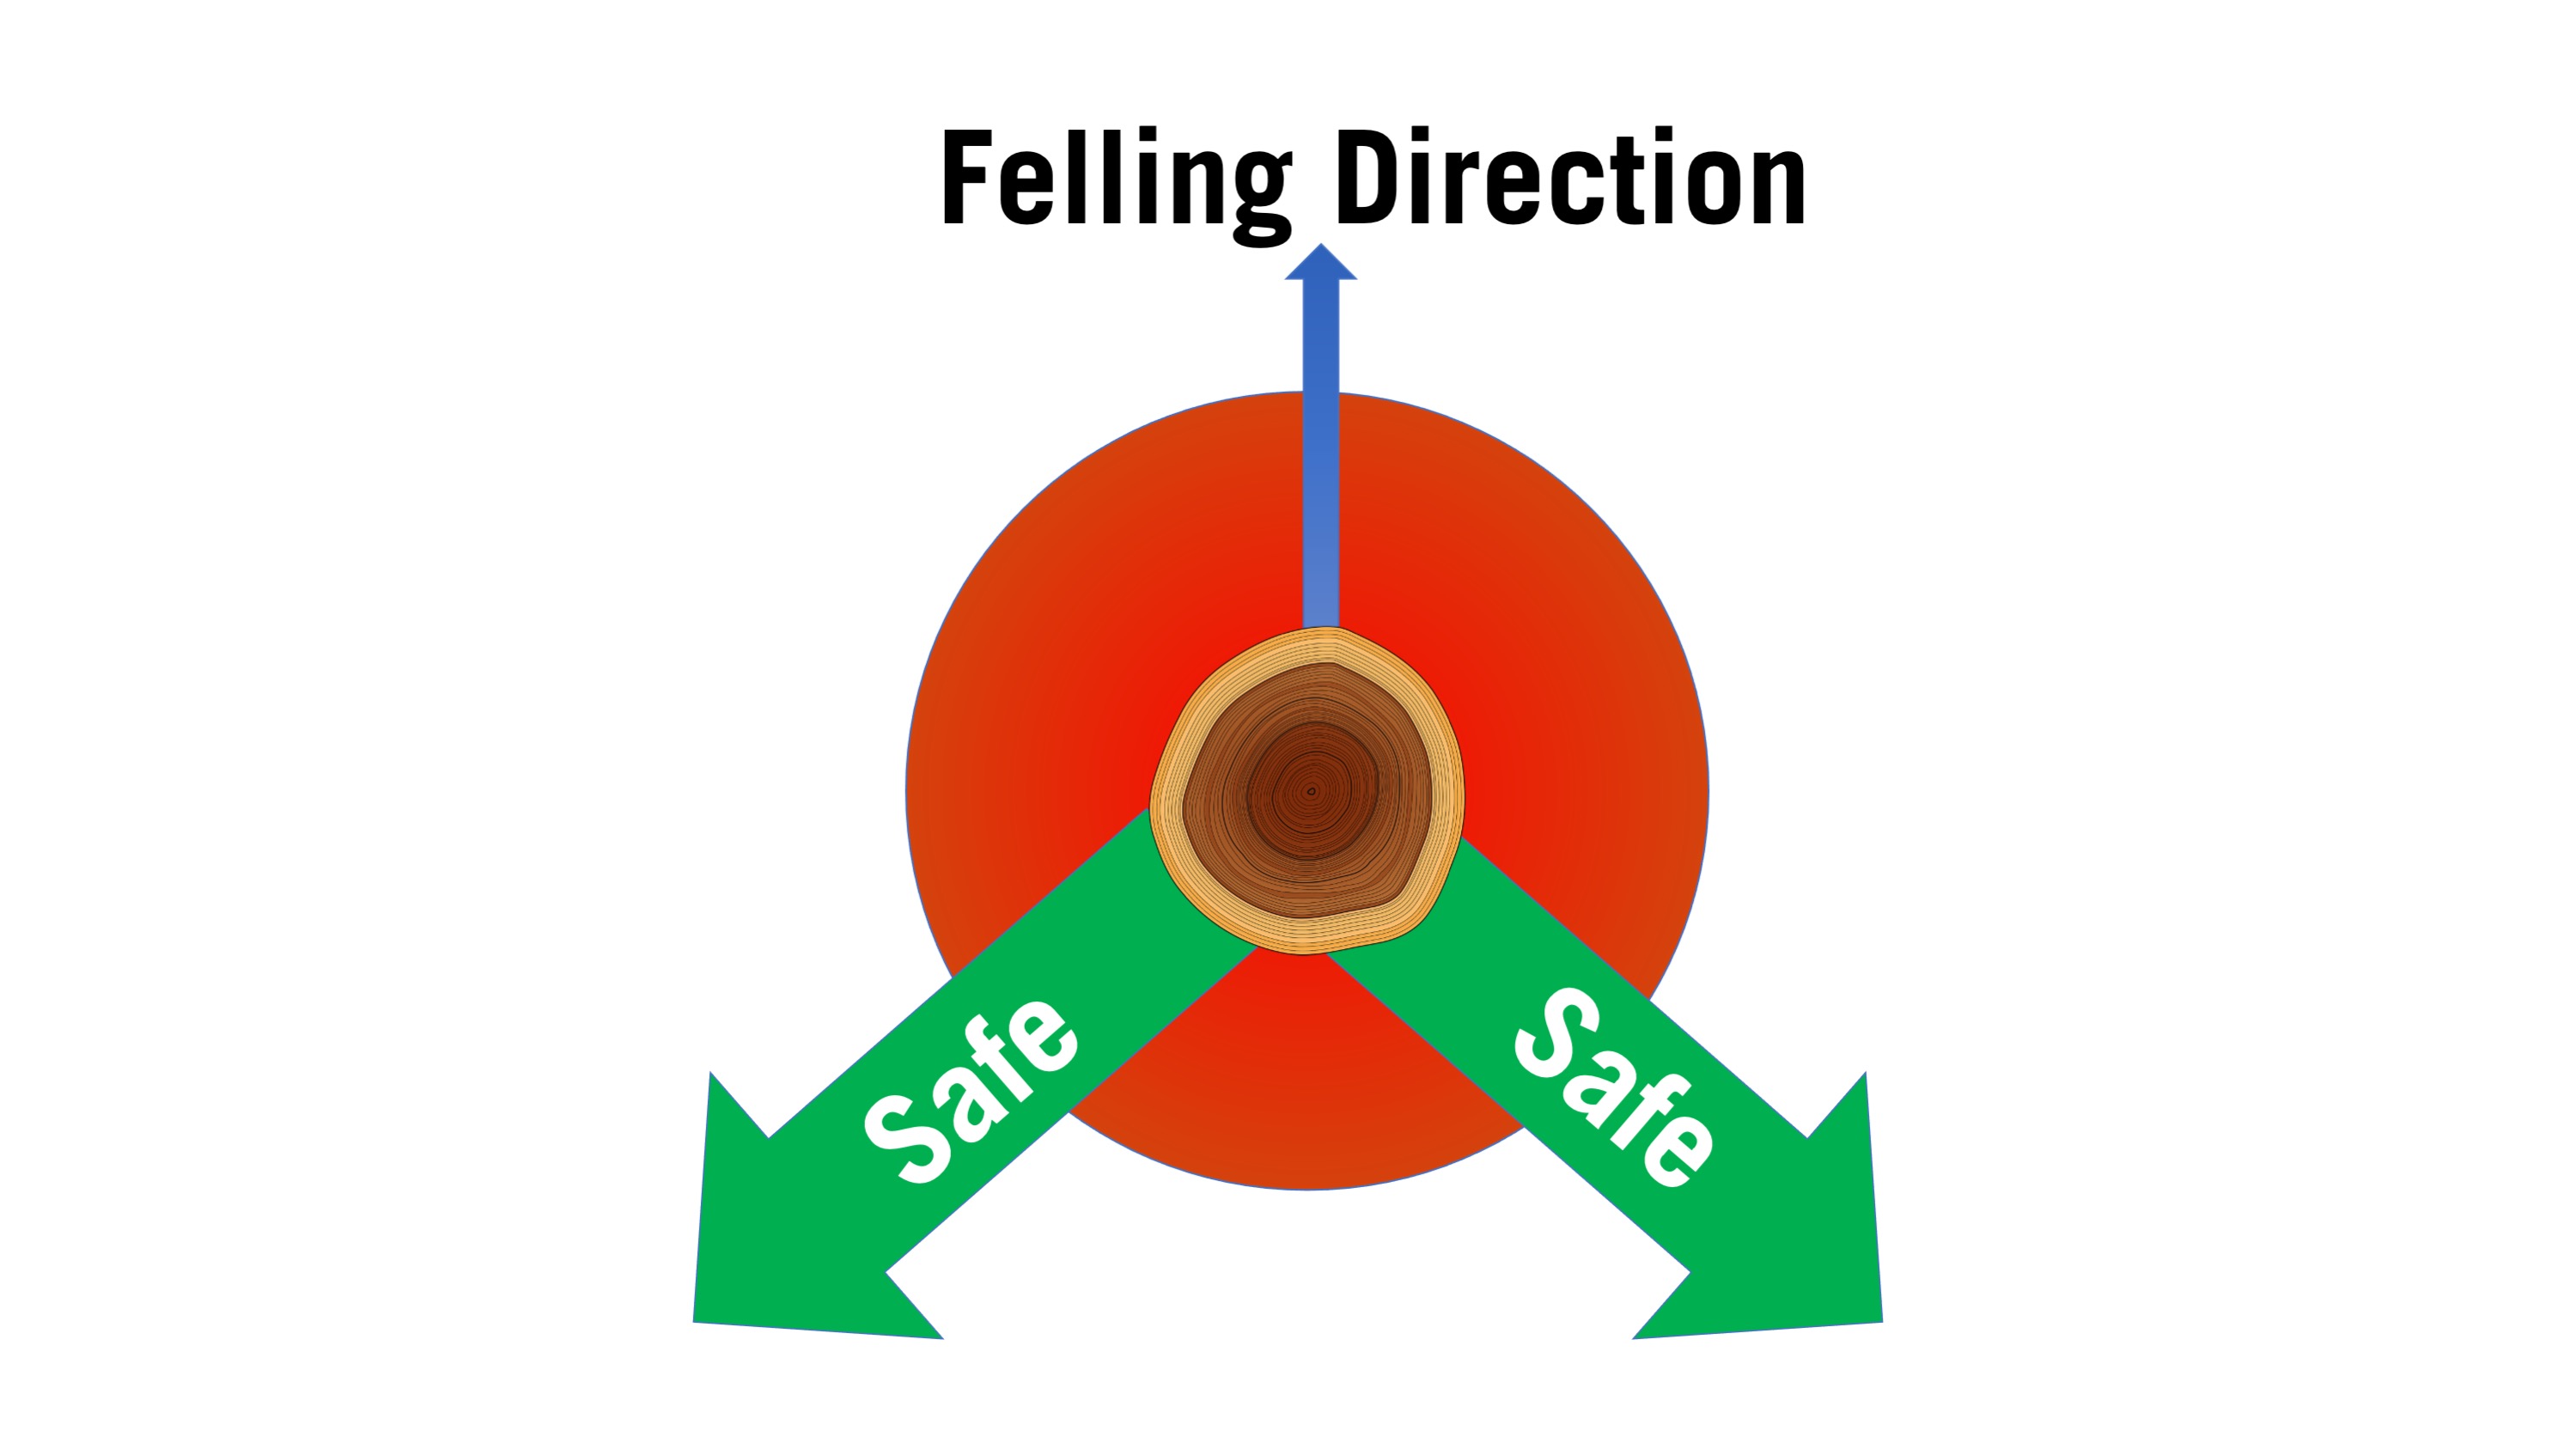 If the felling direction is straight ahead, the safe zone is the area 45 degrees away from either side of the felling direction.